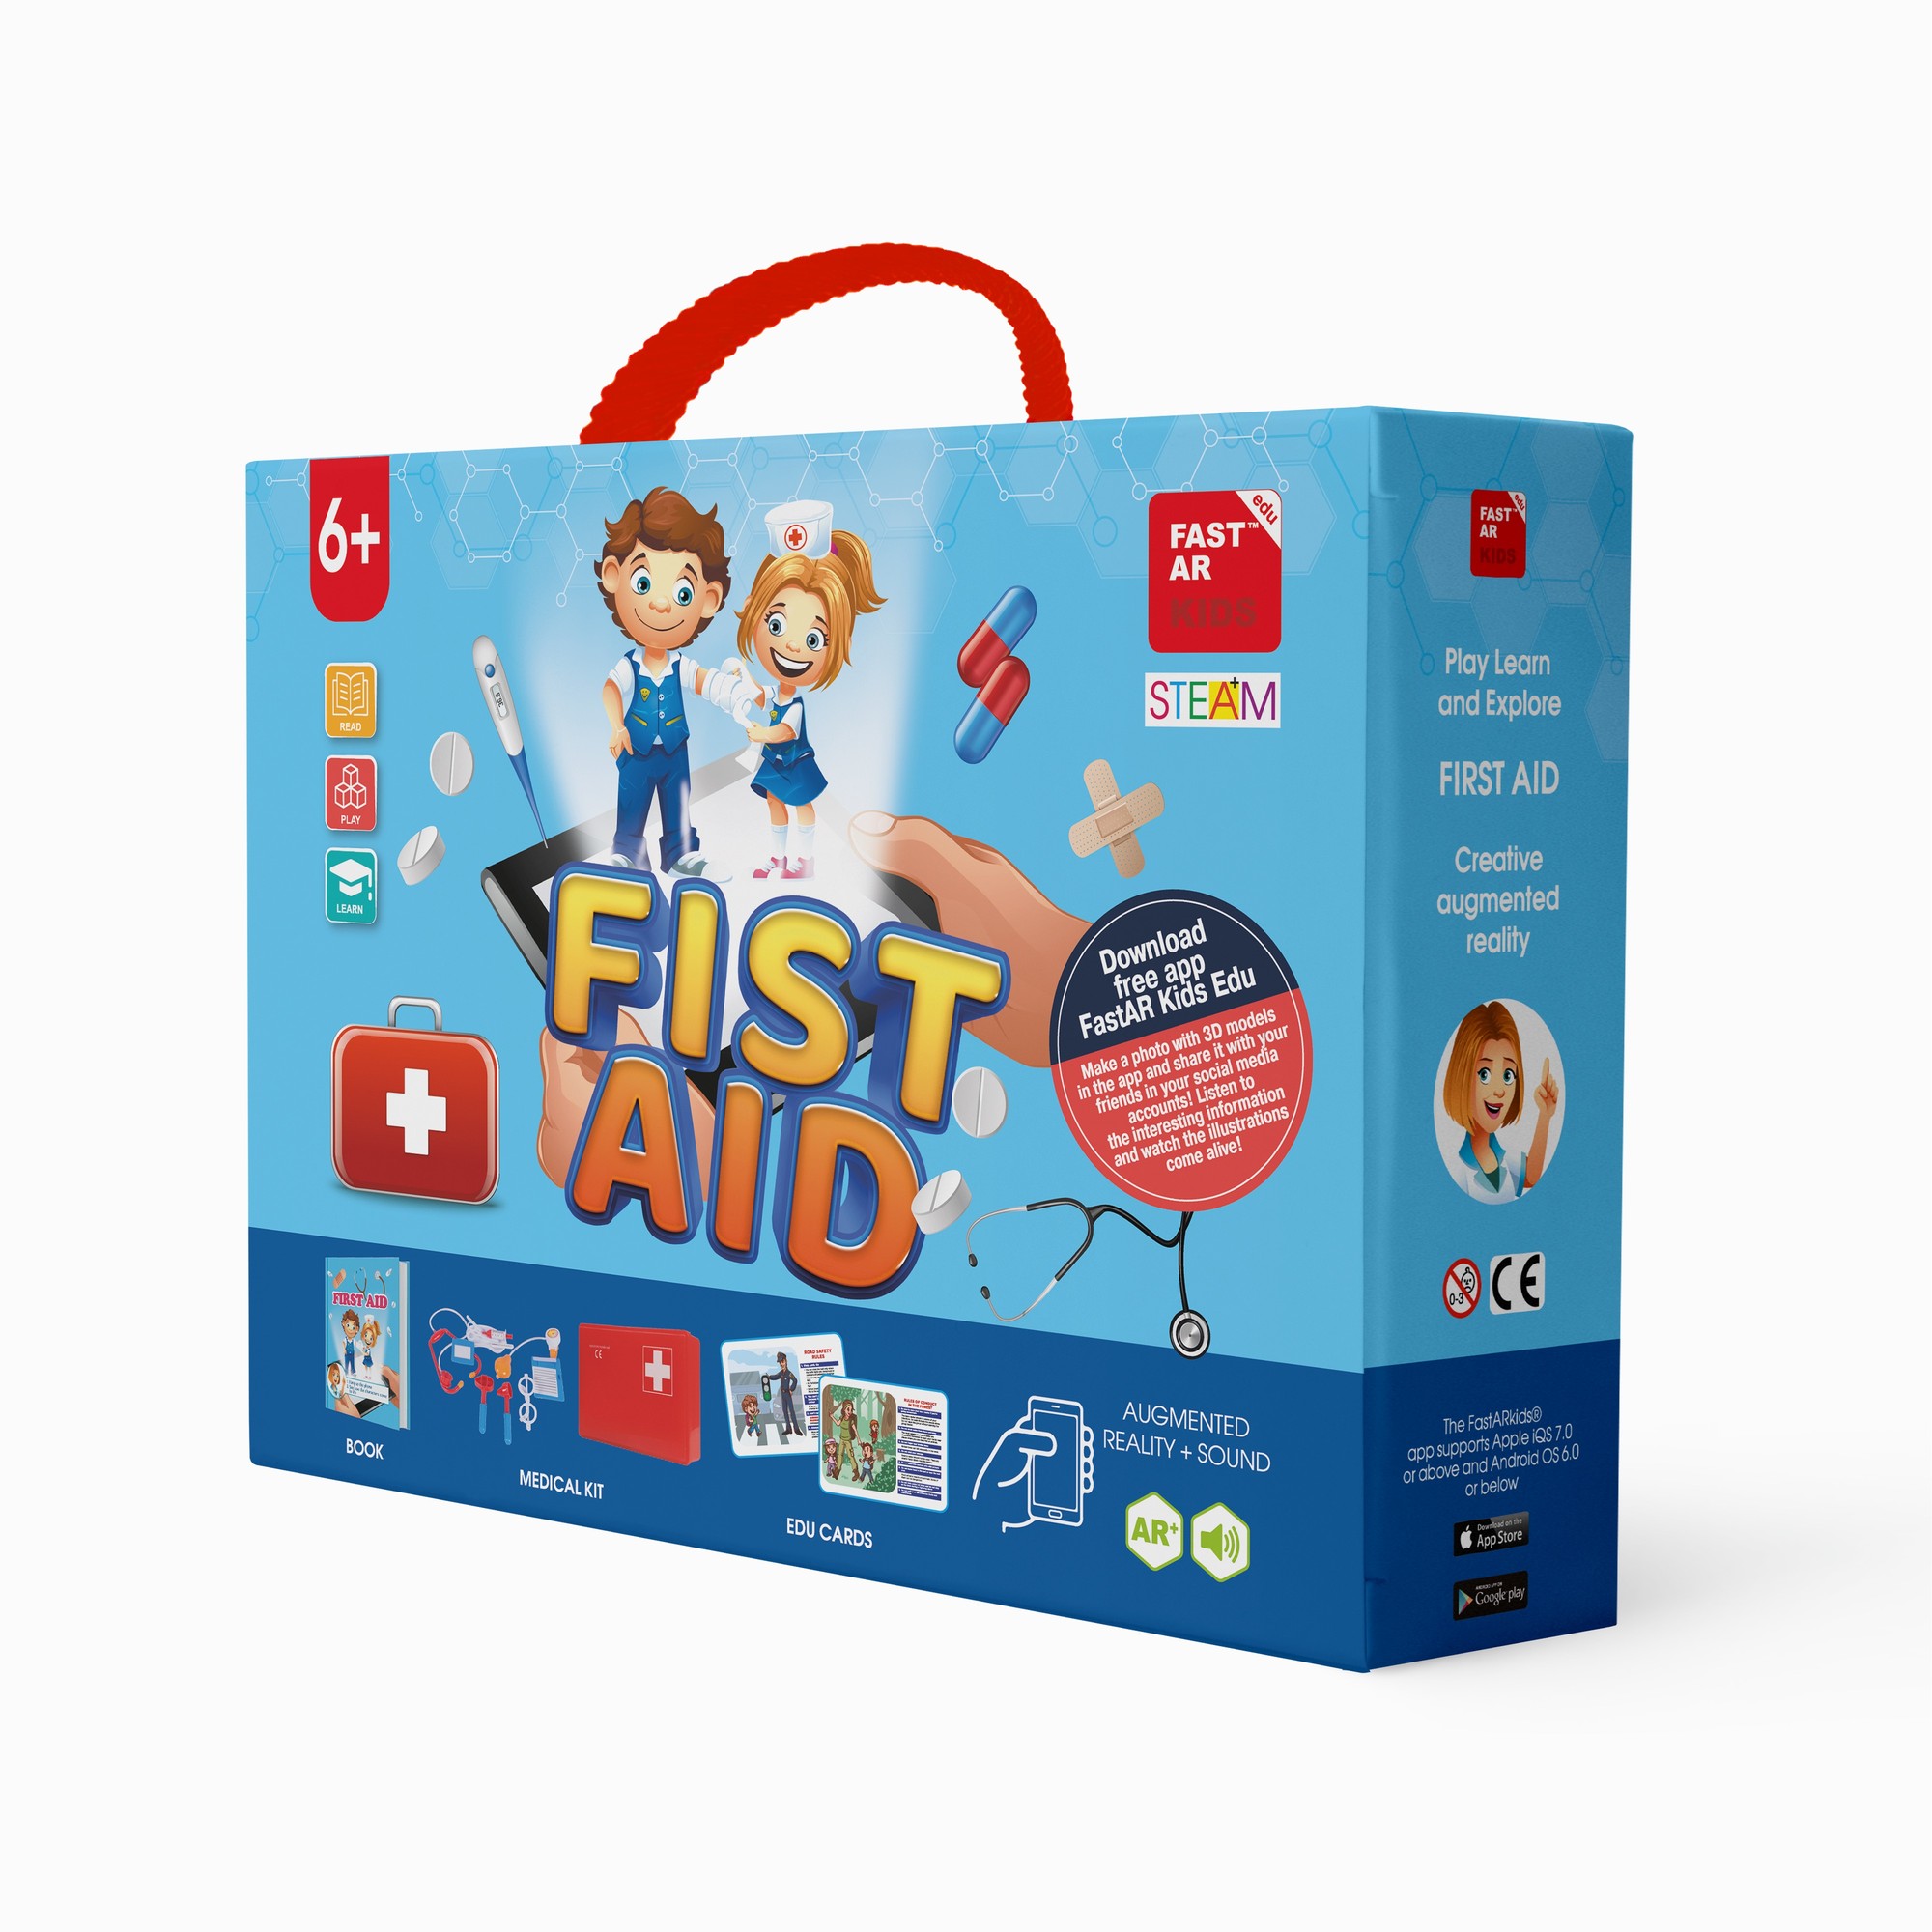 SET FIRST AID with augmented reality